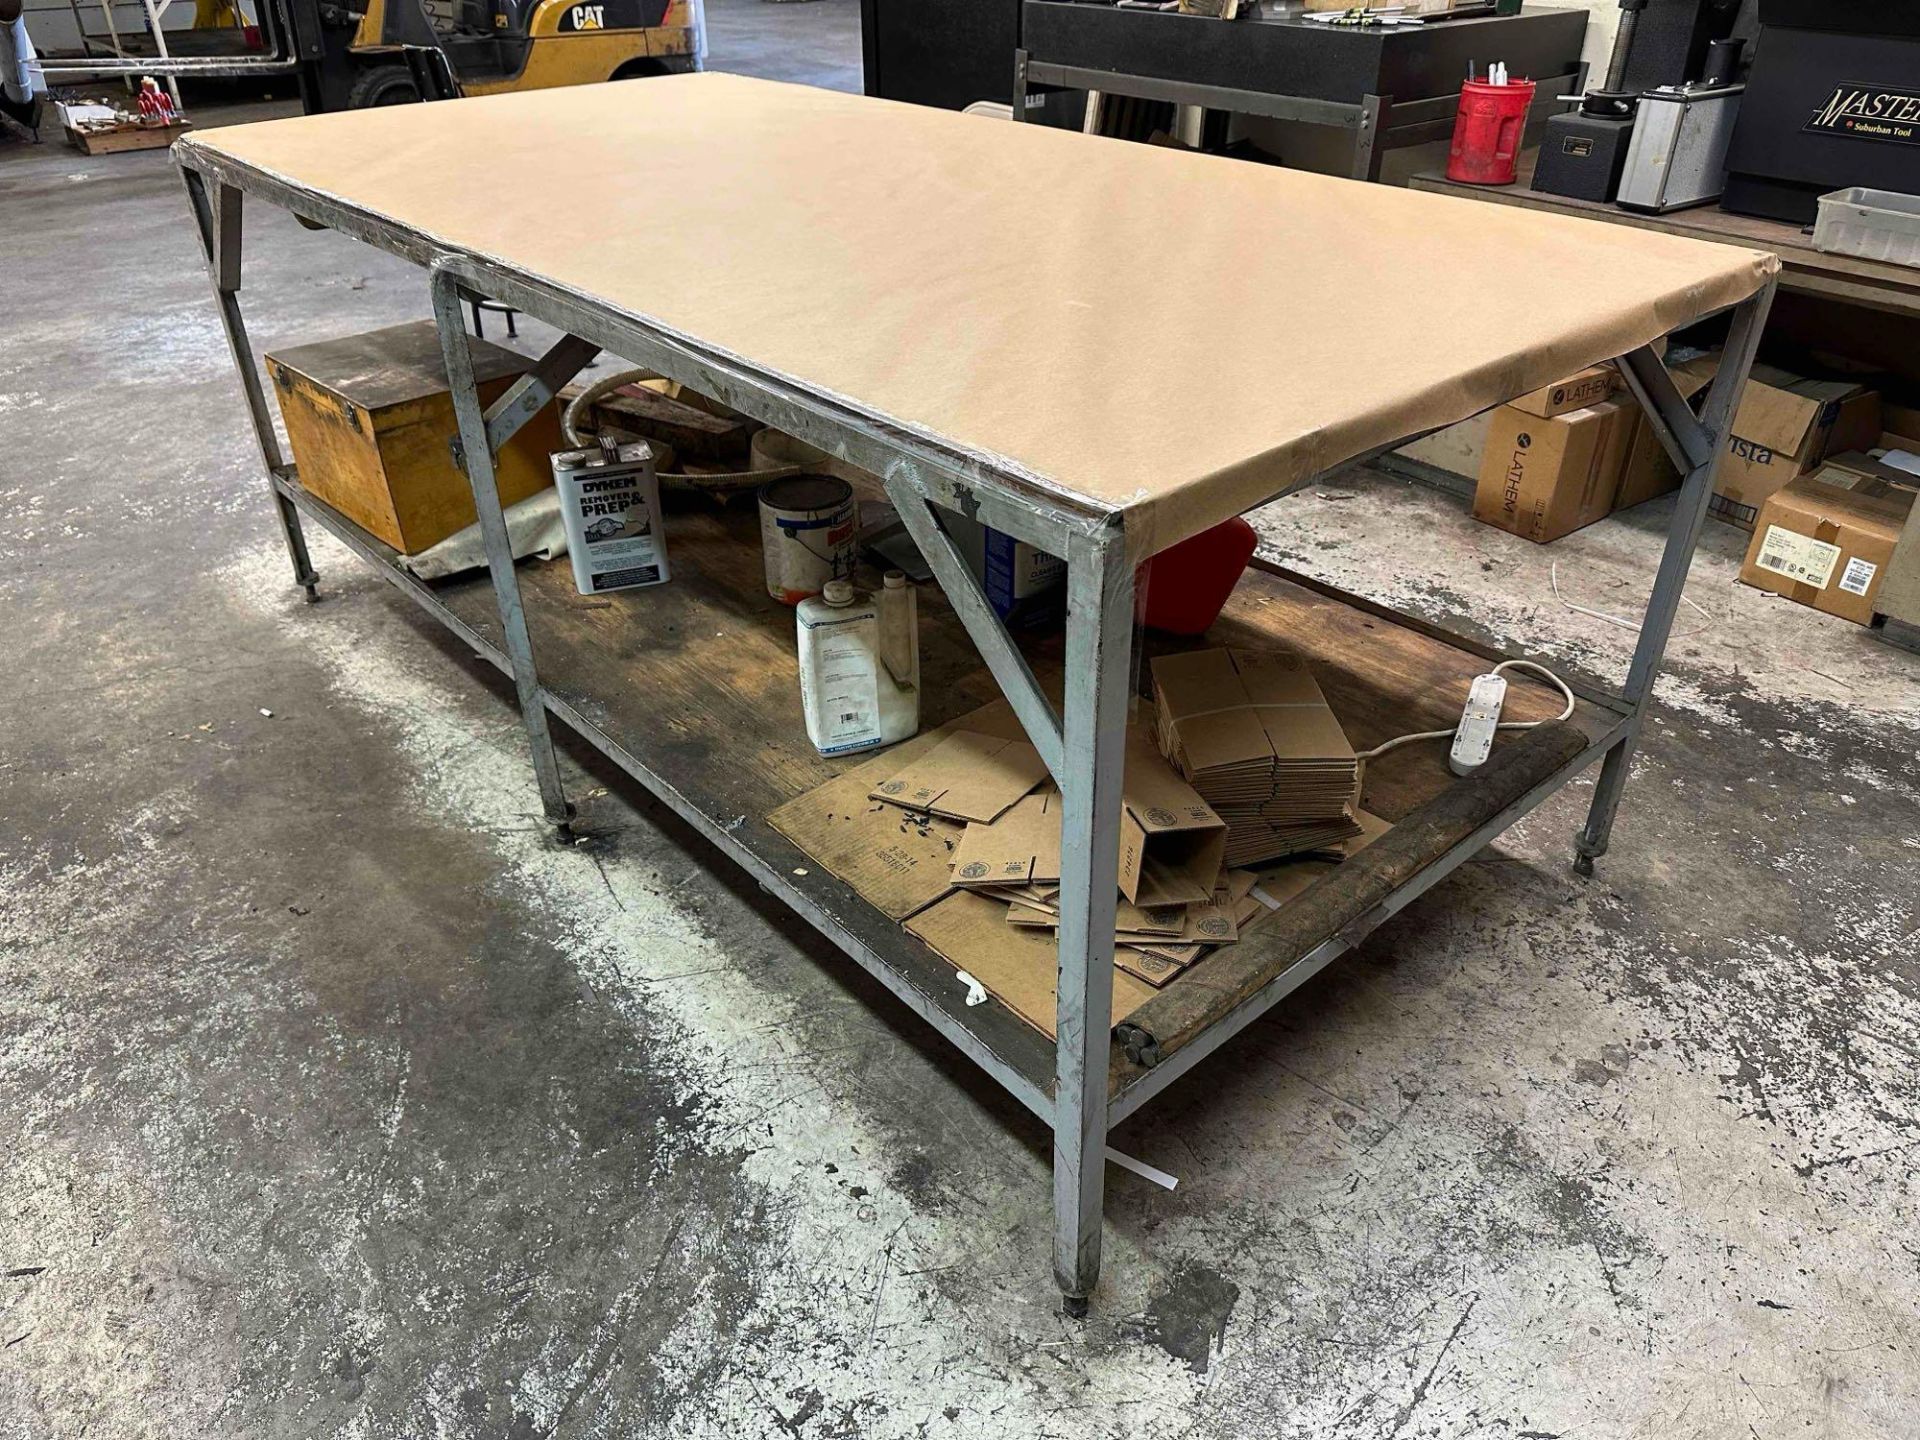 Metal Table with Wooden Top 97” x 49” x 39”.